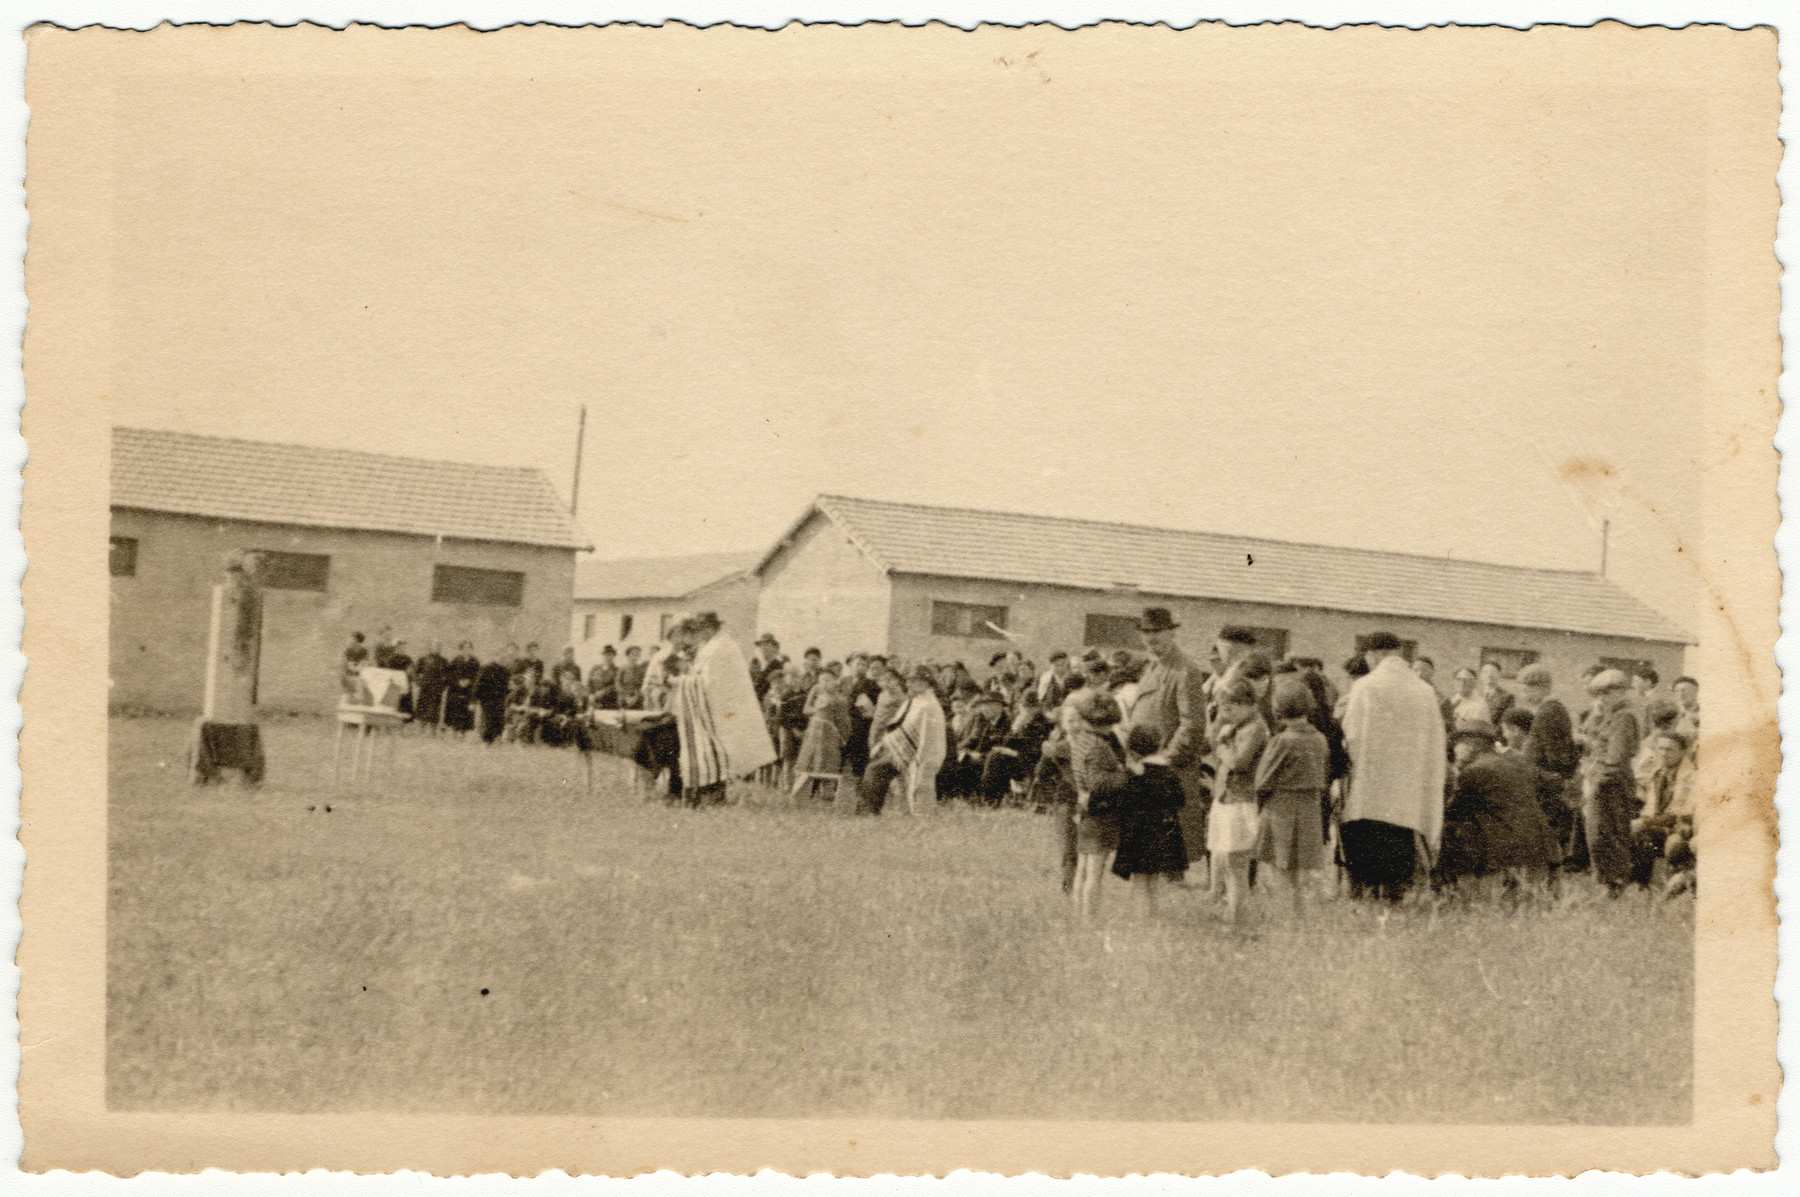 Jewish prisoners at the Rivesaltes internment camp in southern France hold an outdoor prayer service.